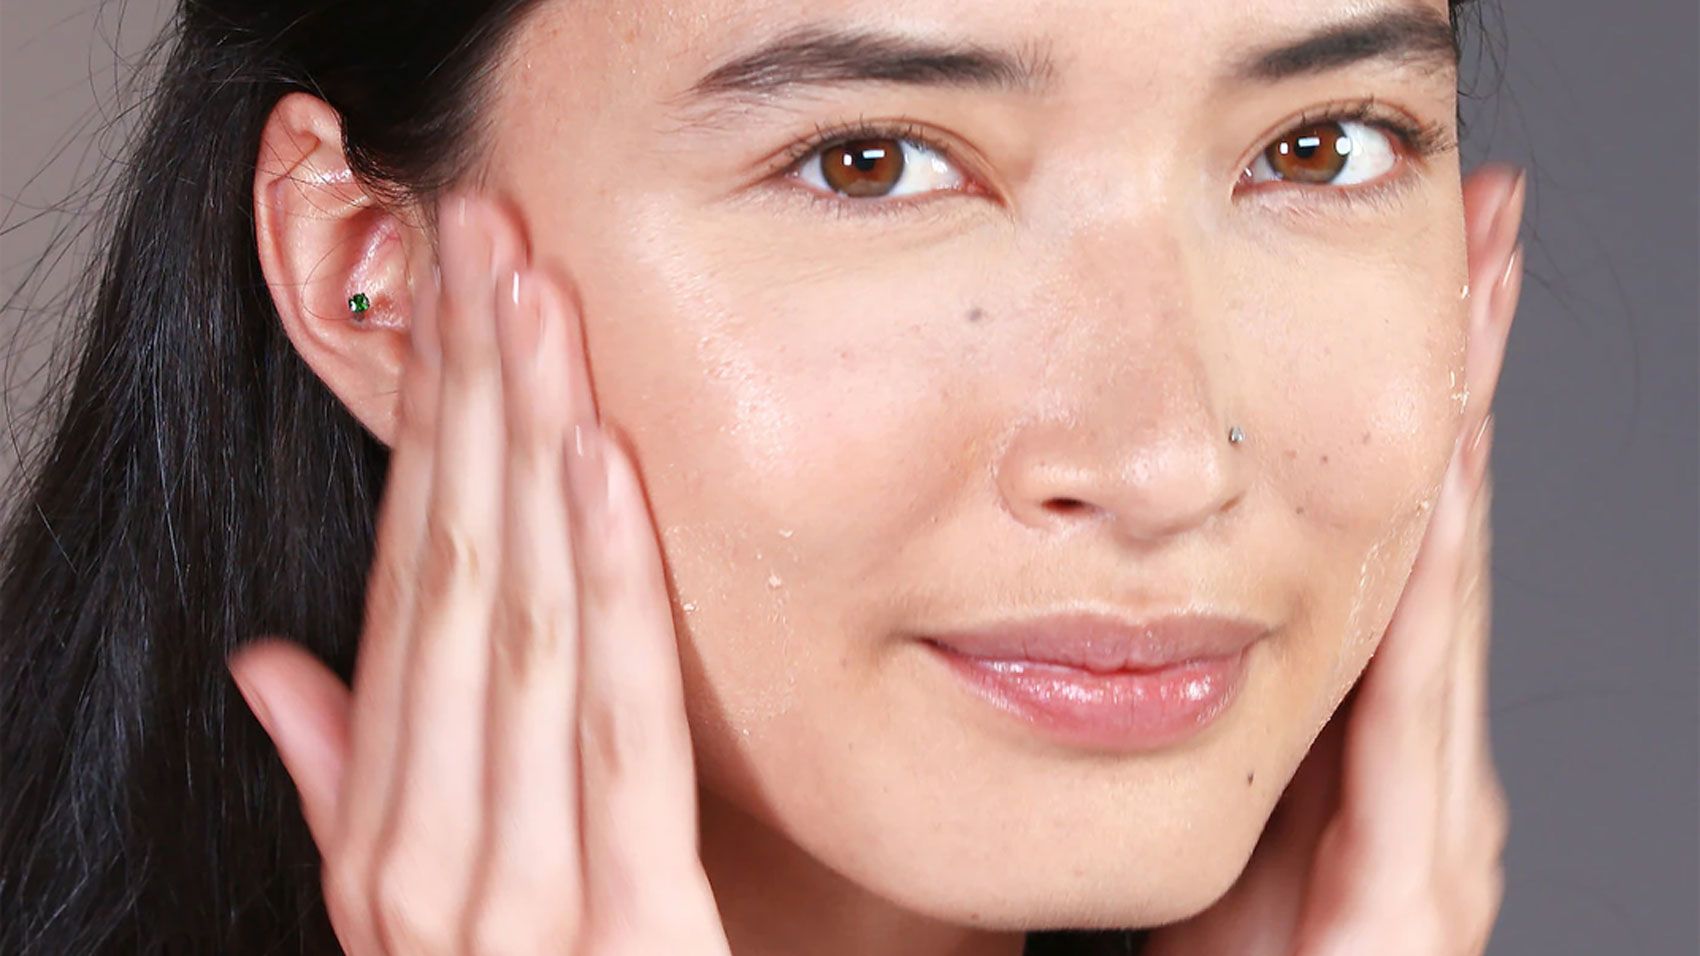 Anti-aging face massage: Benefits, tools, and how to try